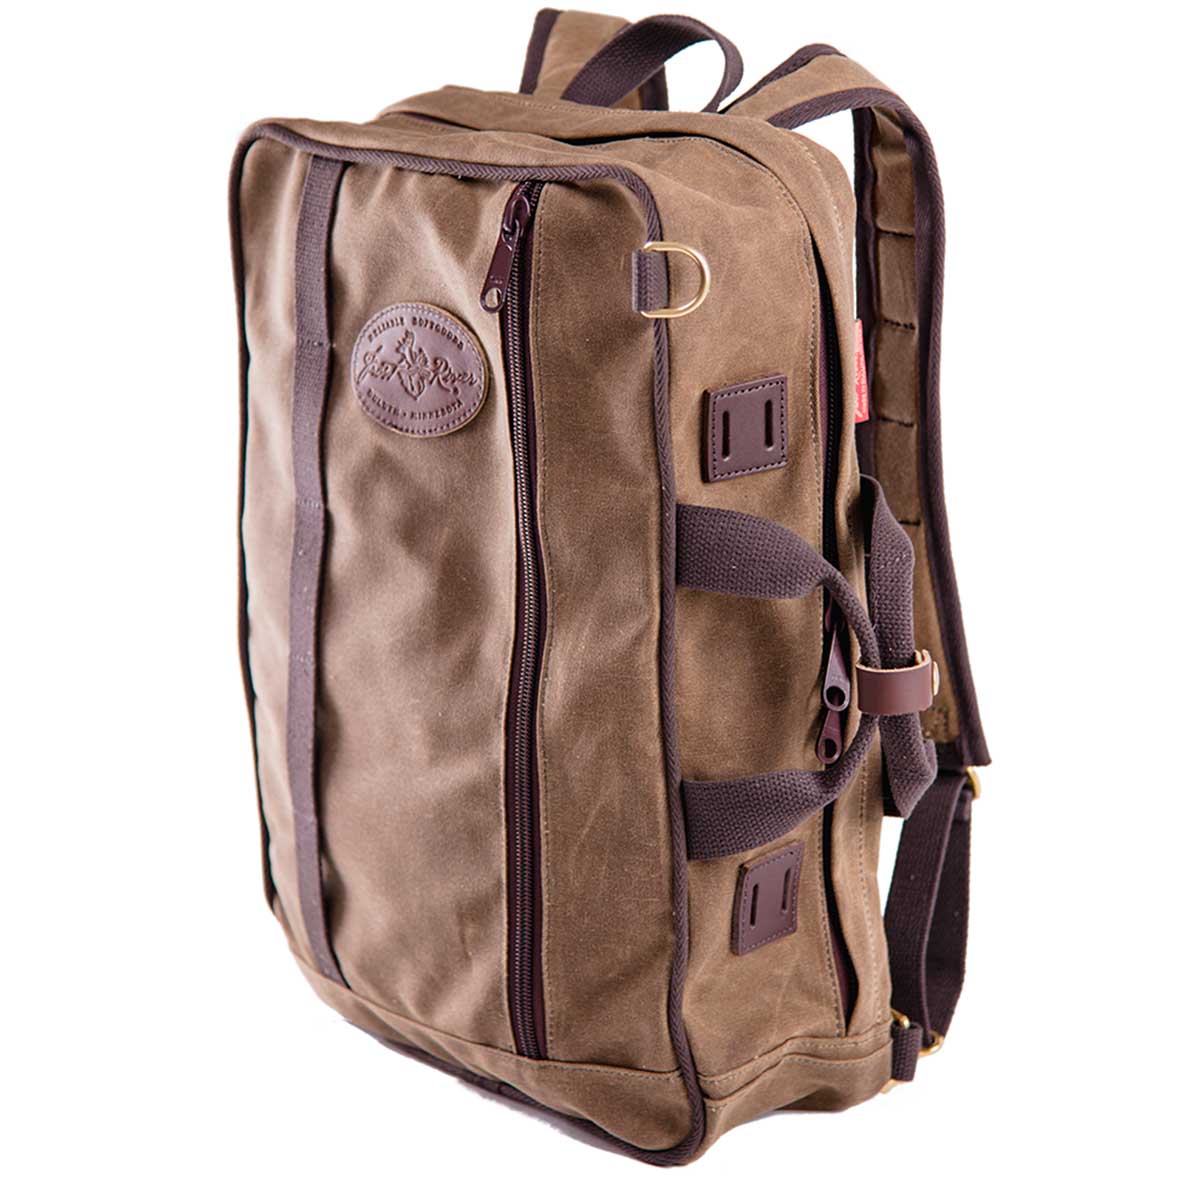 Voyageur Backpack Brief By Frost River Boundary Waters ...